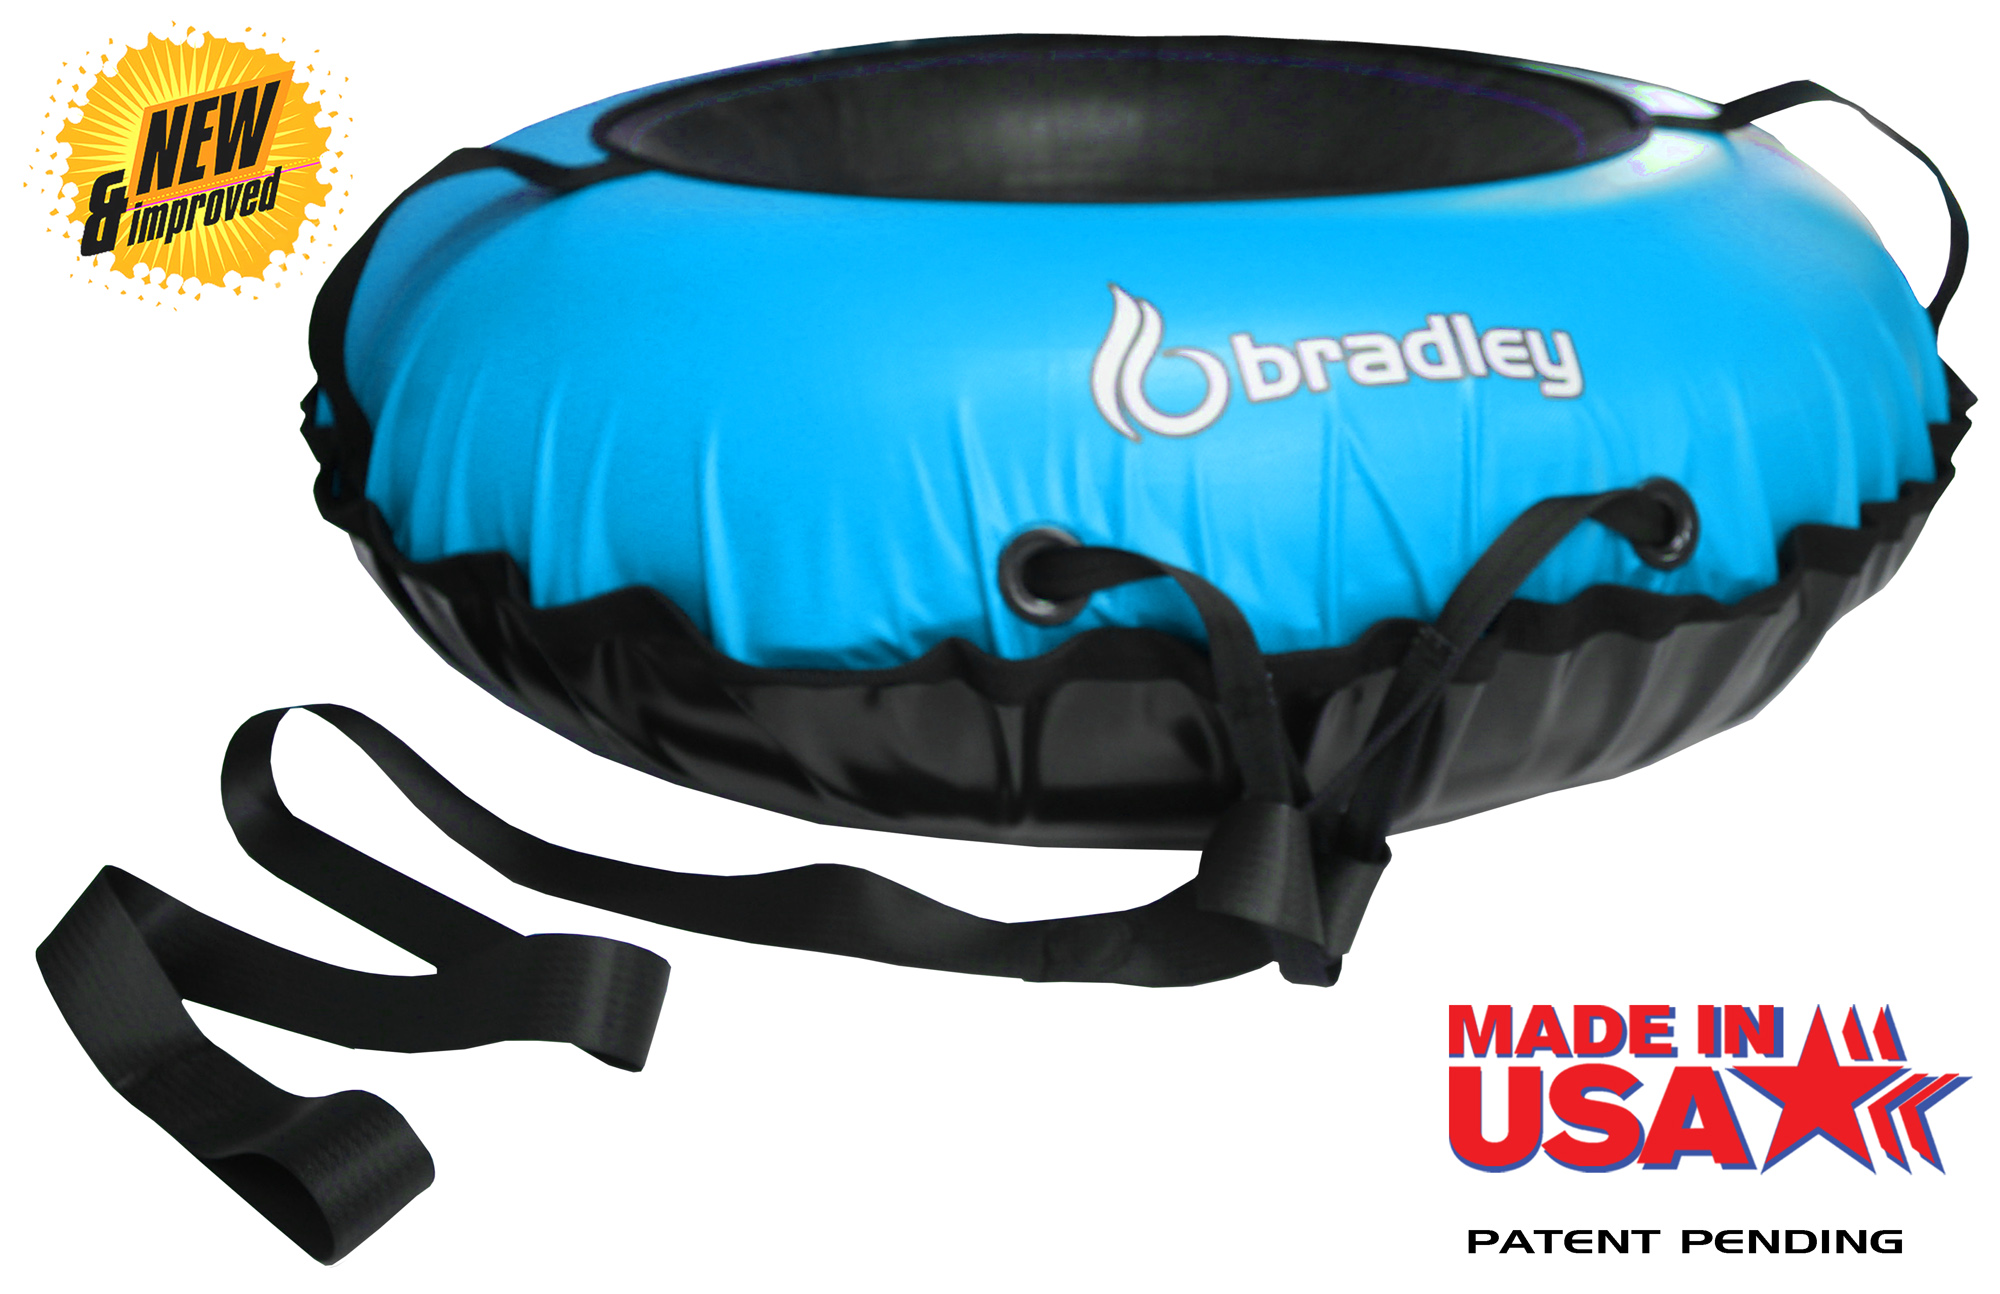 Bradley Ultimate Tow-able Snow Tube Sled and Heavy Duty Cover ? - image 1 of 5